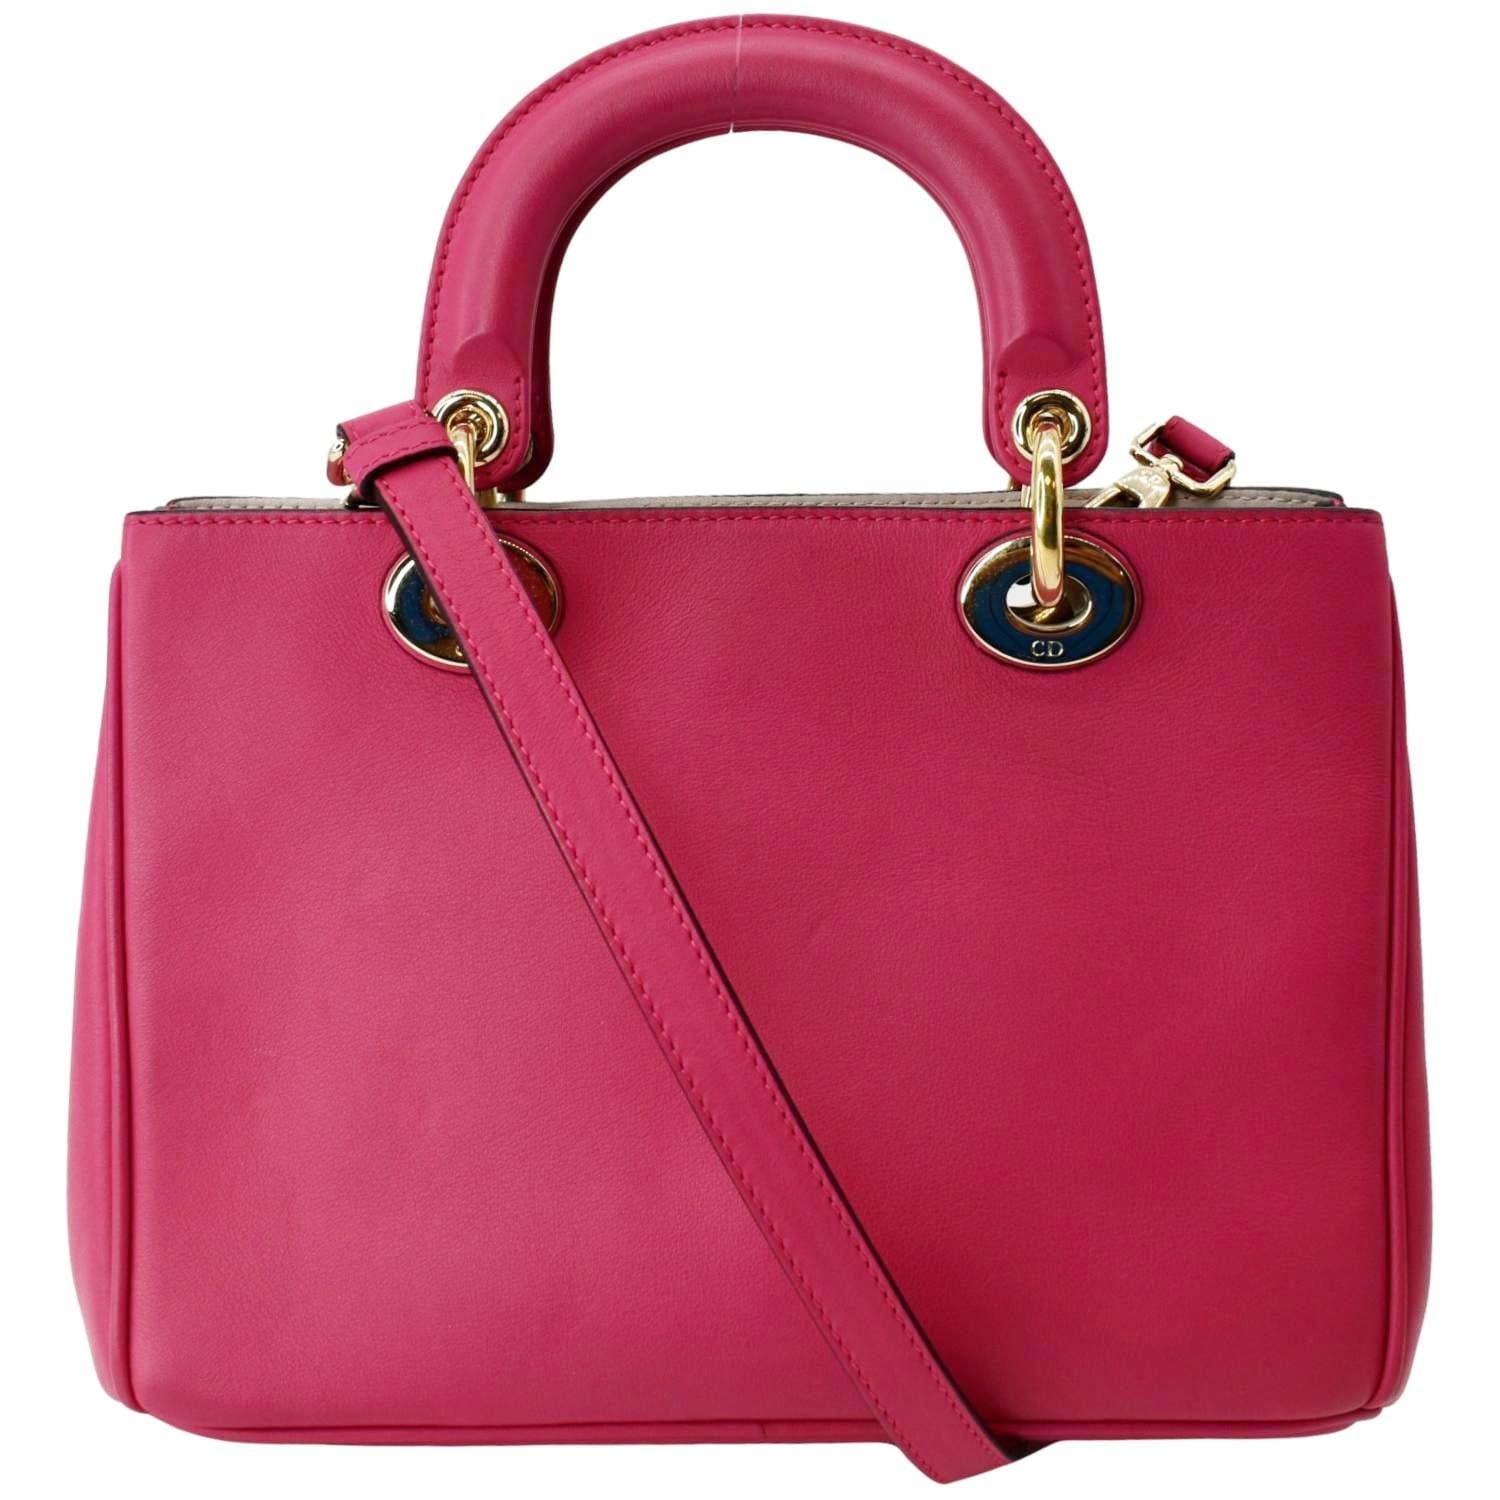 Christian Dior Women's Pink Tote Bags